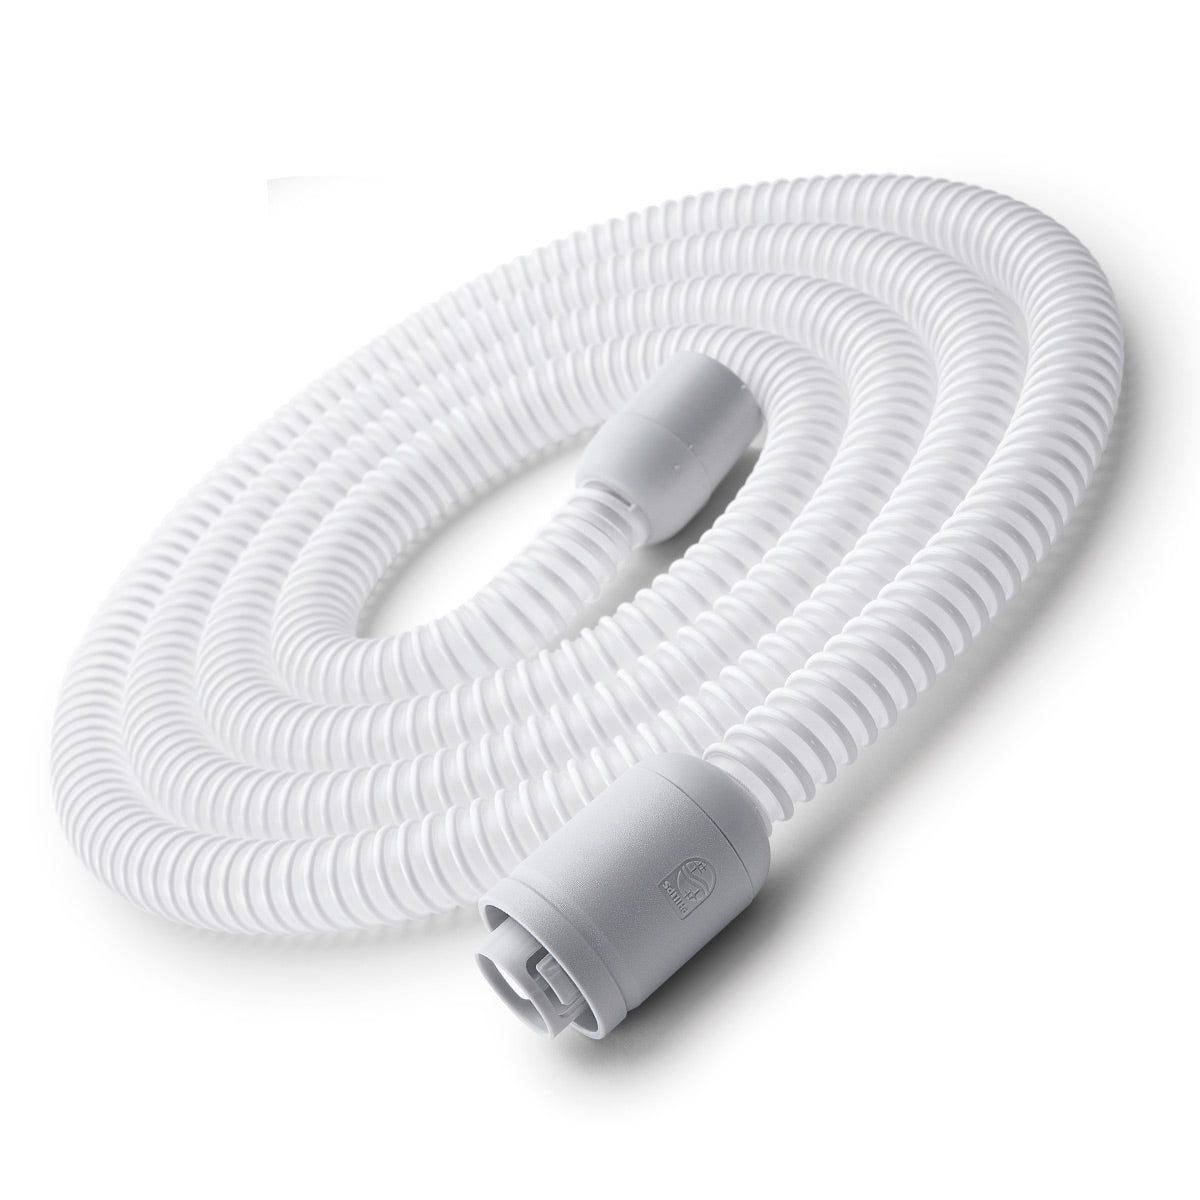 MicroFlex Hose Tubing for DreamStation 2 & DreamStation GO Series CPAP Machines (6-Foot)